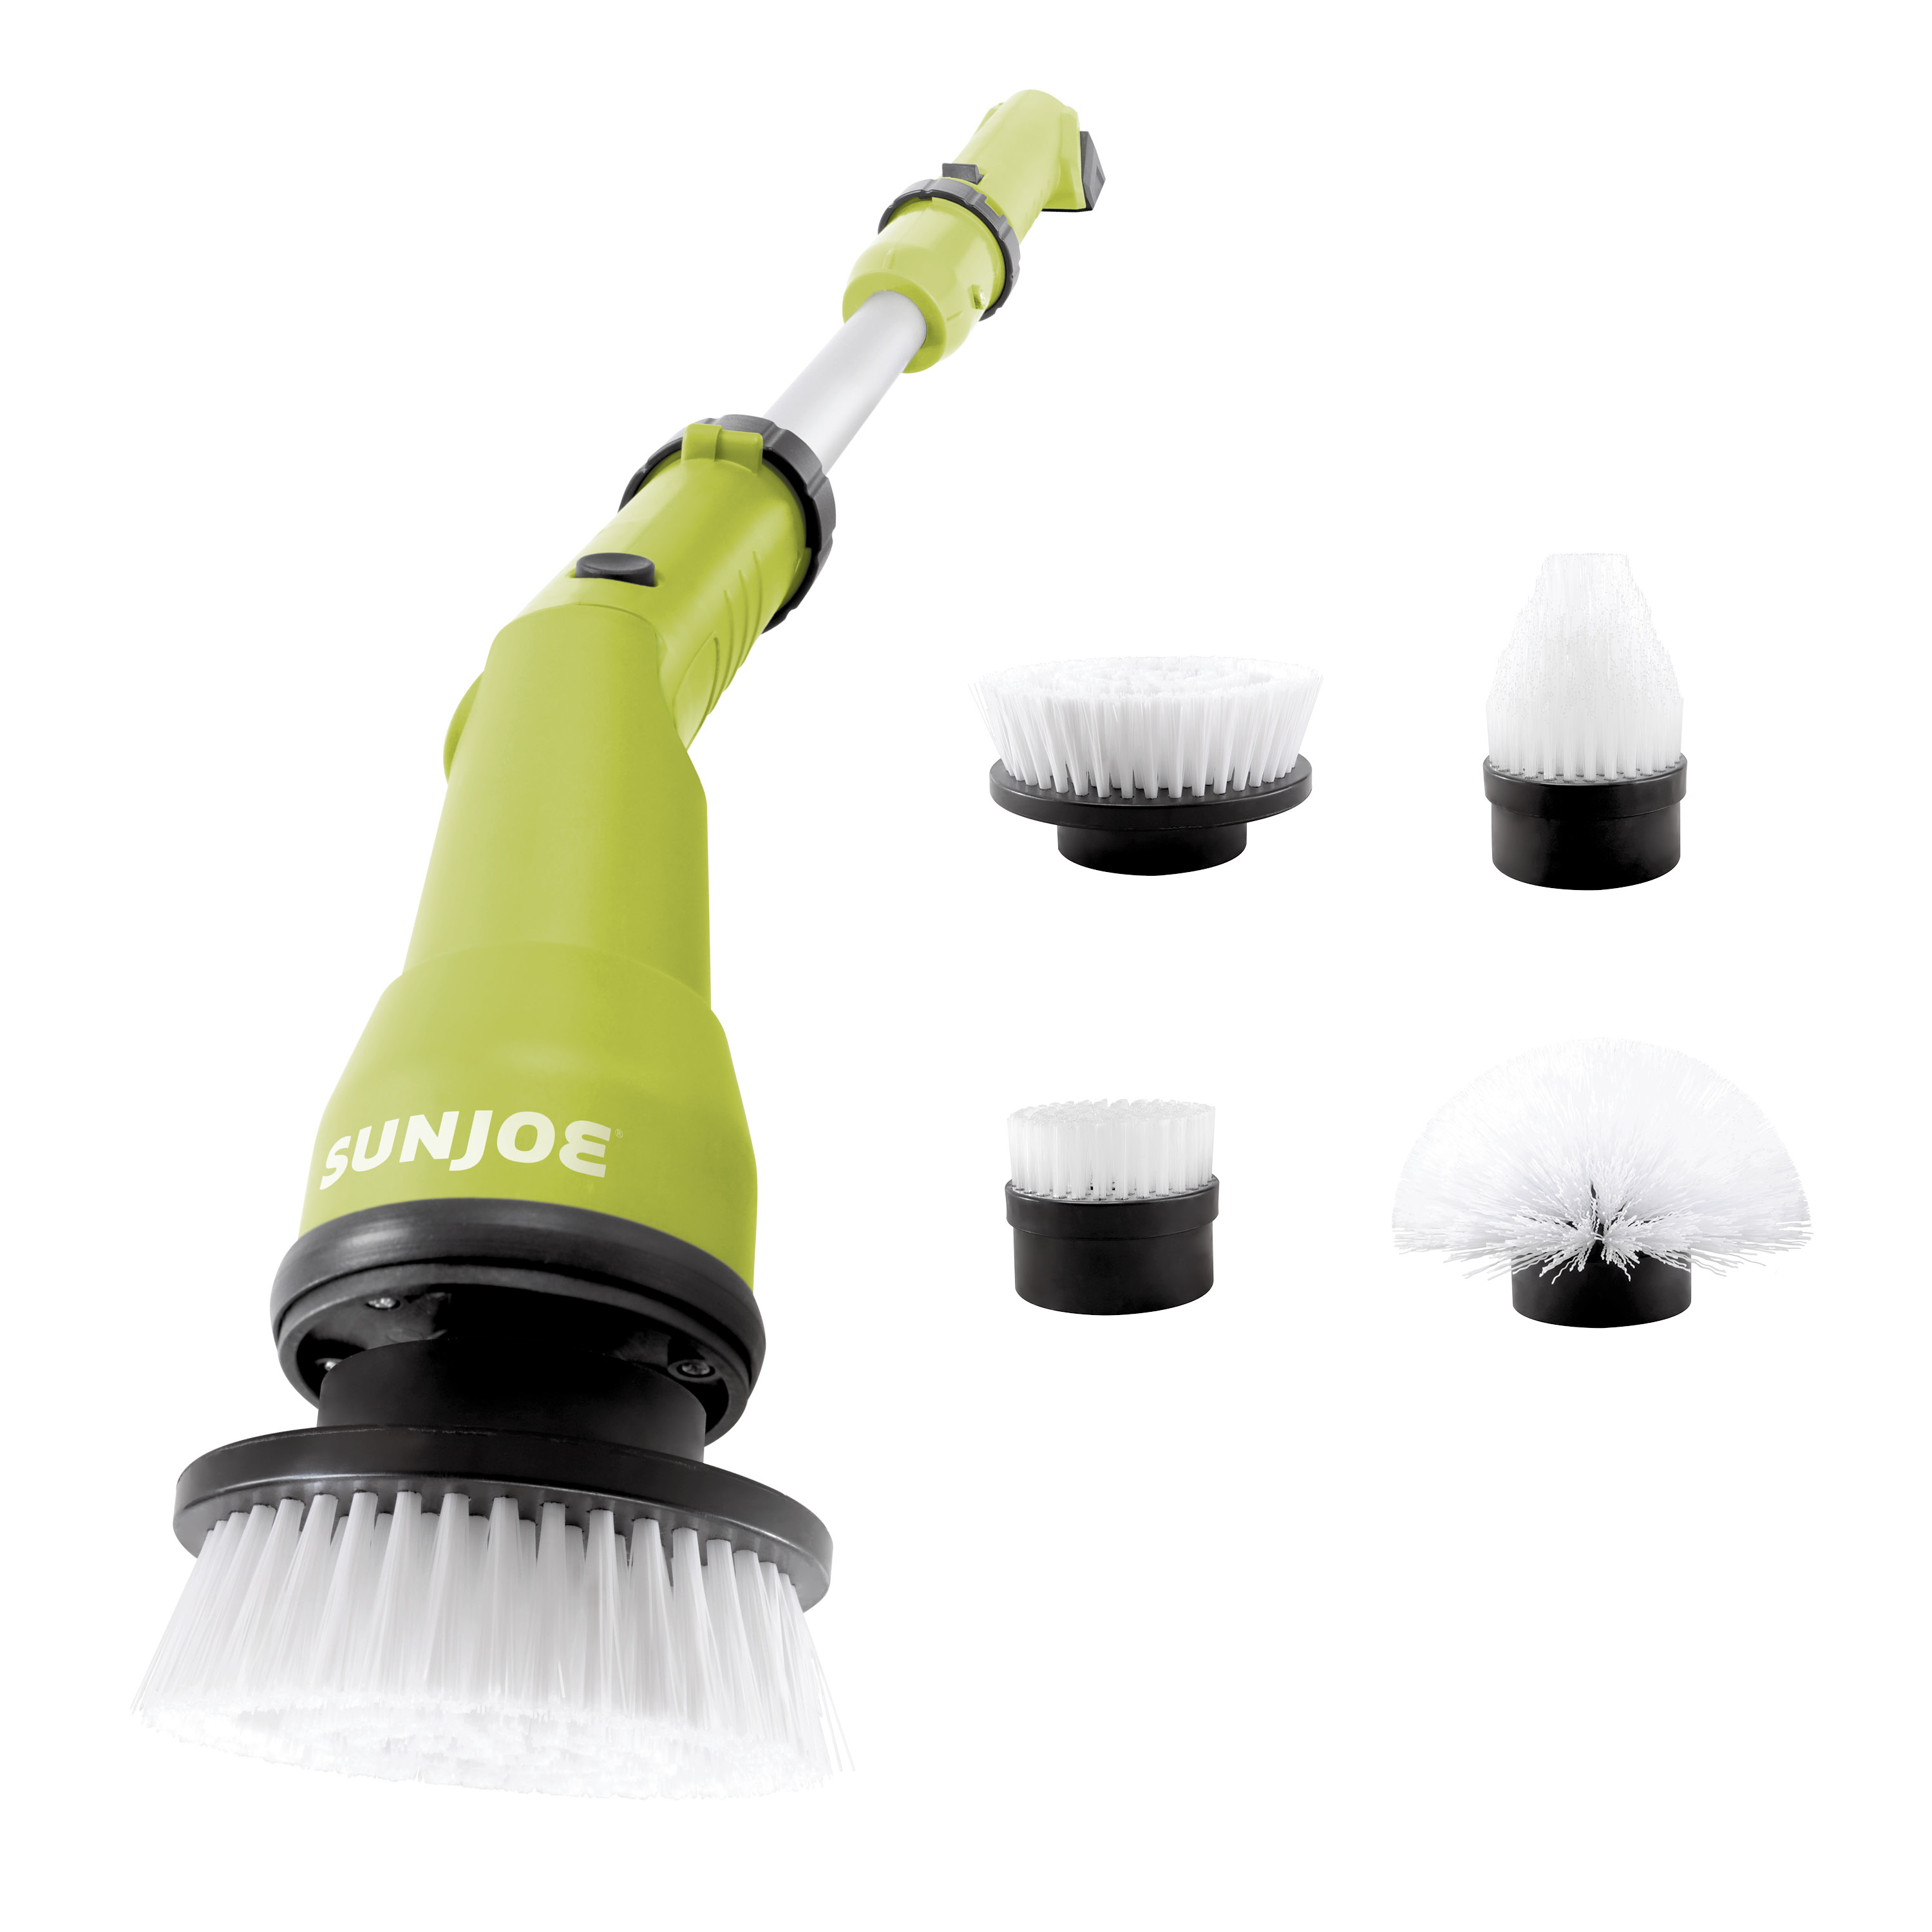 SnowJoe - Handheld Power Scrub Brushes; Voltage: 24V; Handle Length (Inch):  27 to 50; Battery Chemistry: Lithium-ion; Batteries Included: Yes;  Material: Nylon; Maximum Rpm: 1000.000 - 13449095 - MSC Industrial Supply